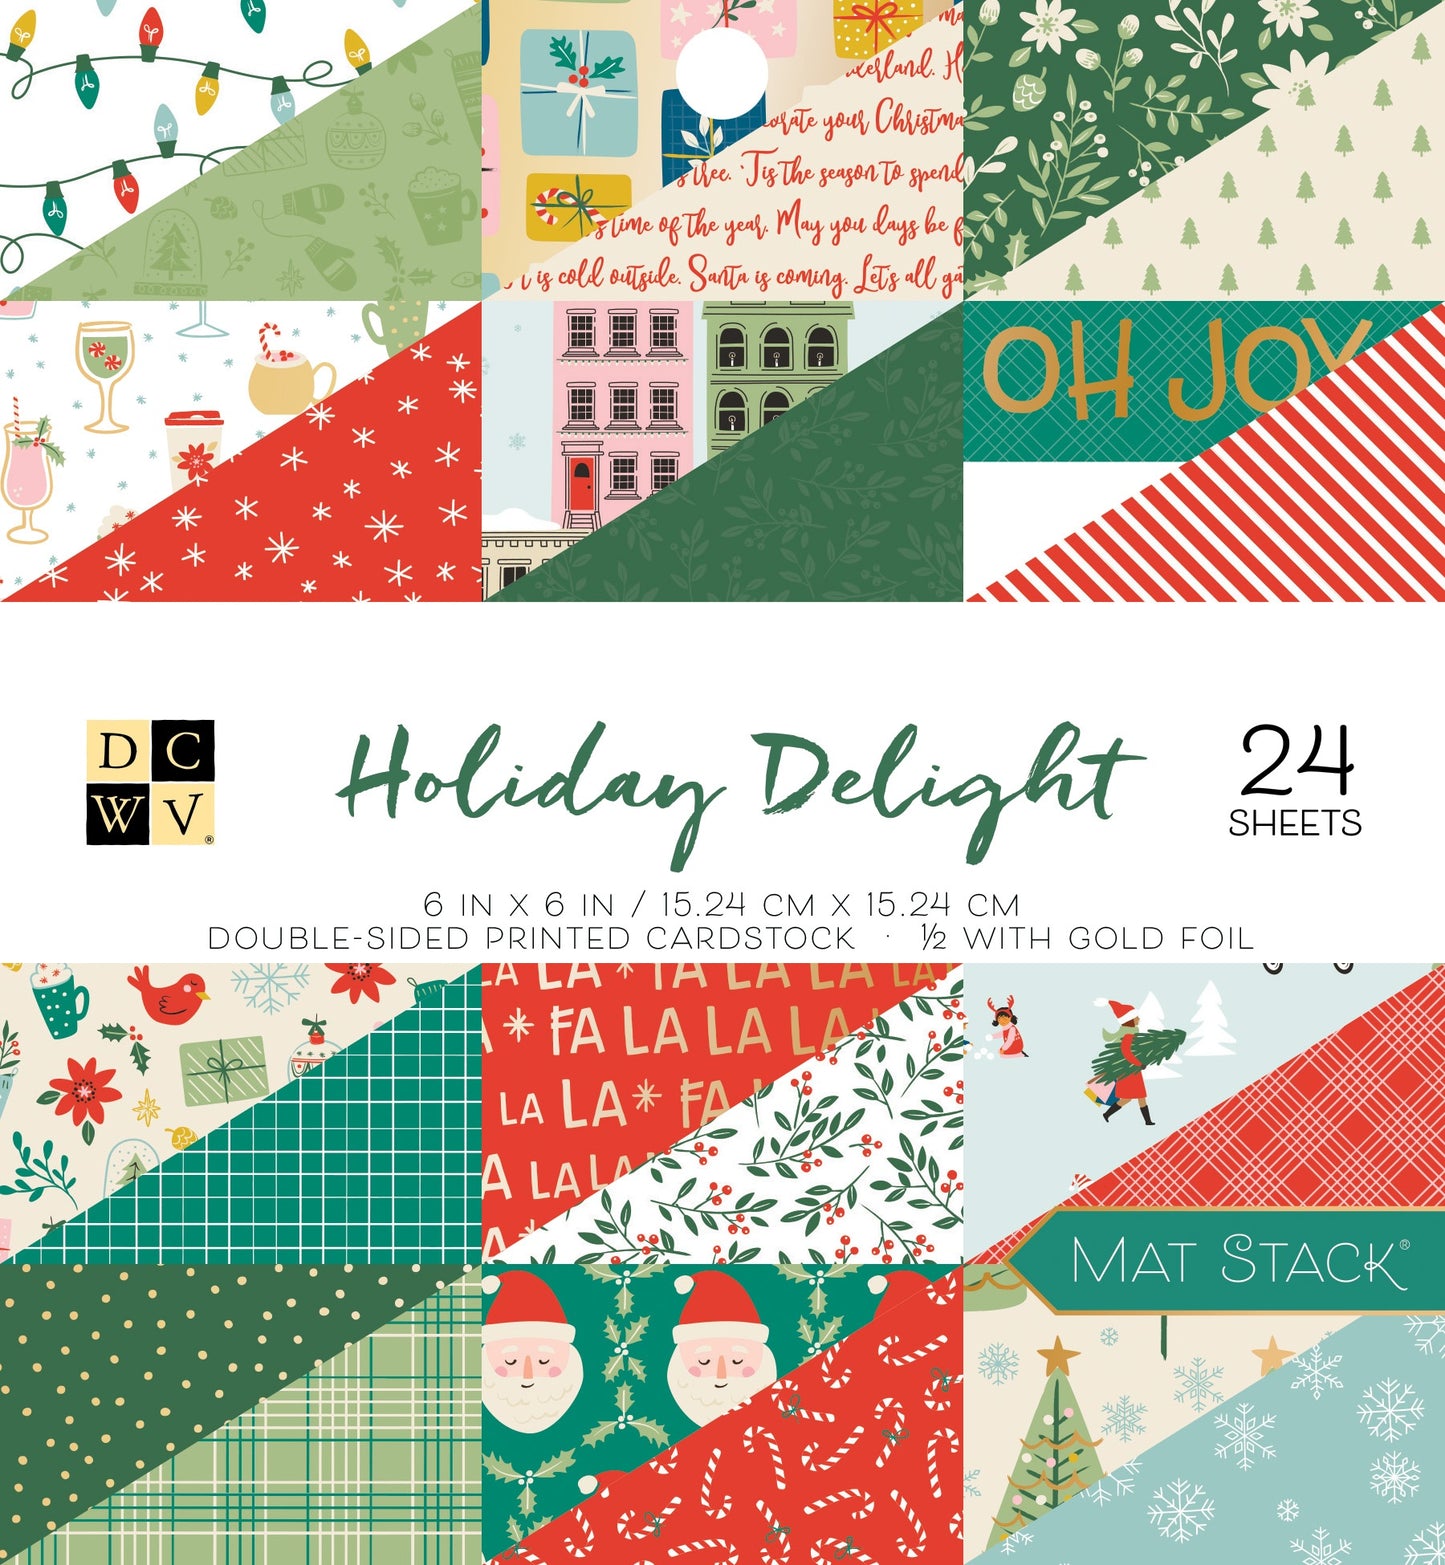 Christmas Time Double-Sided Cardstock 12X12 - 850019830163